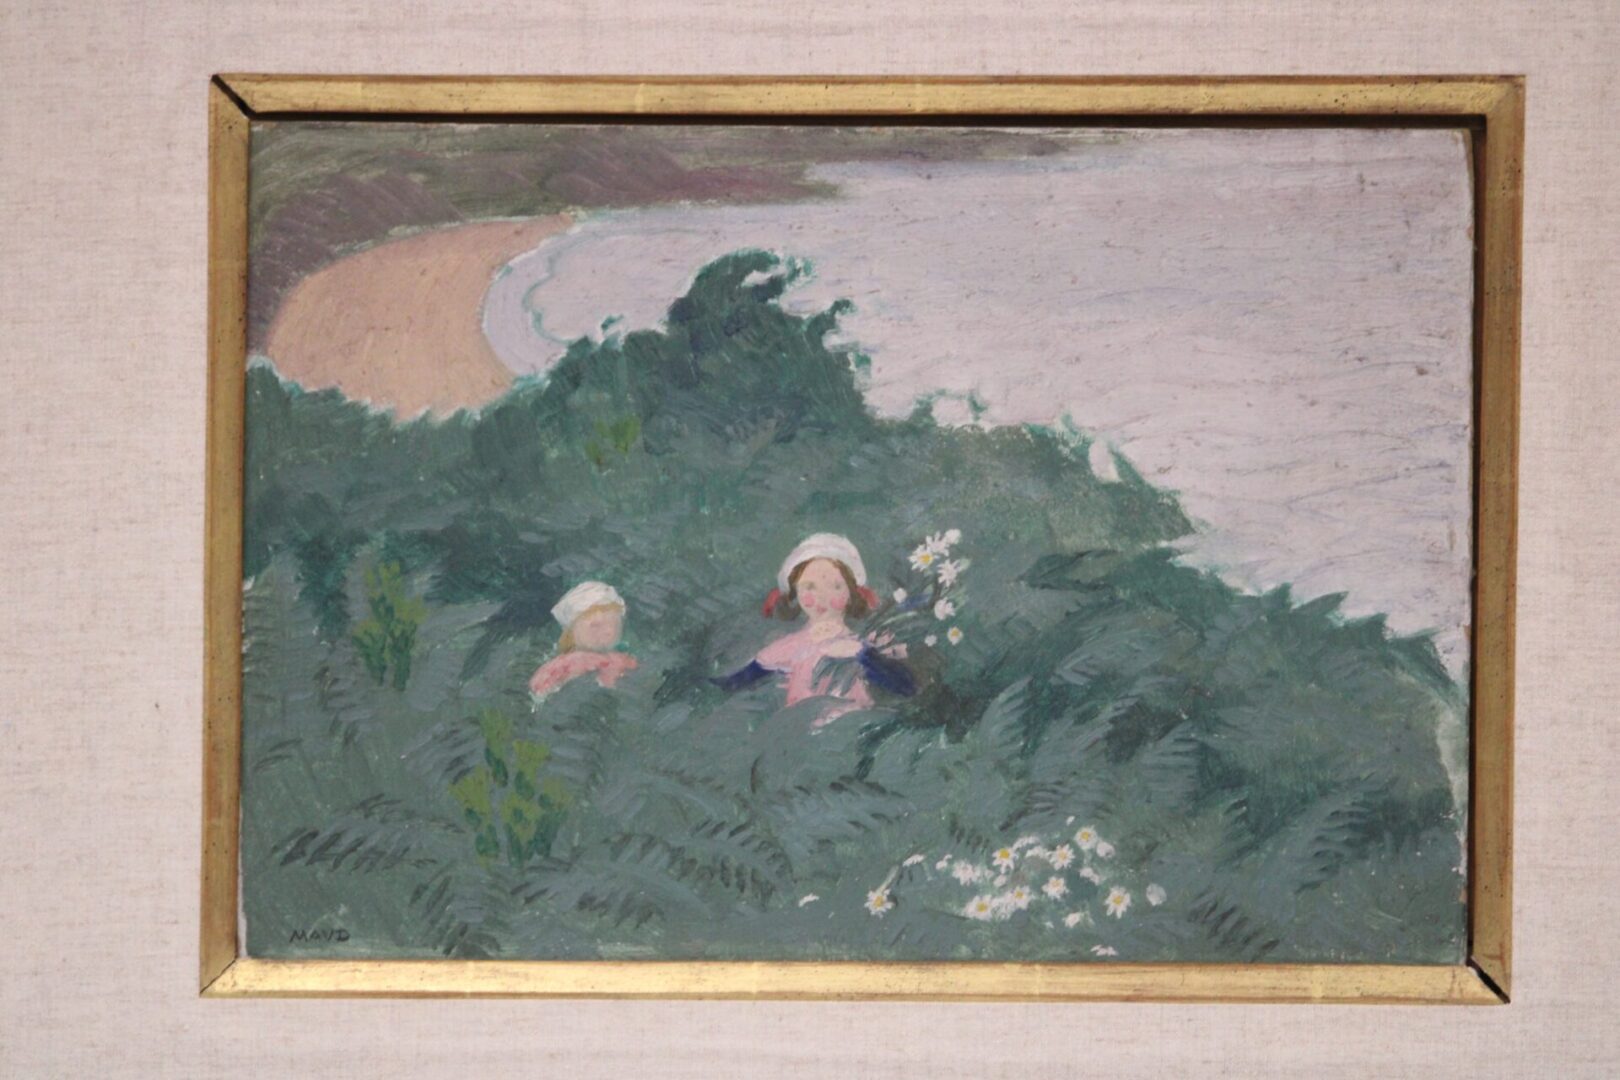 A painting of two women in the bushes